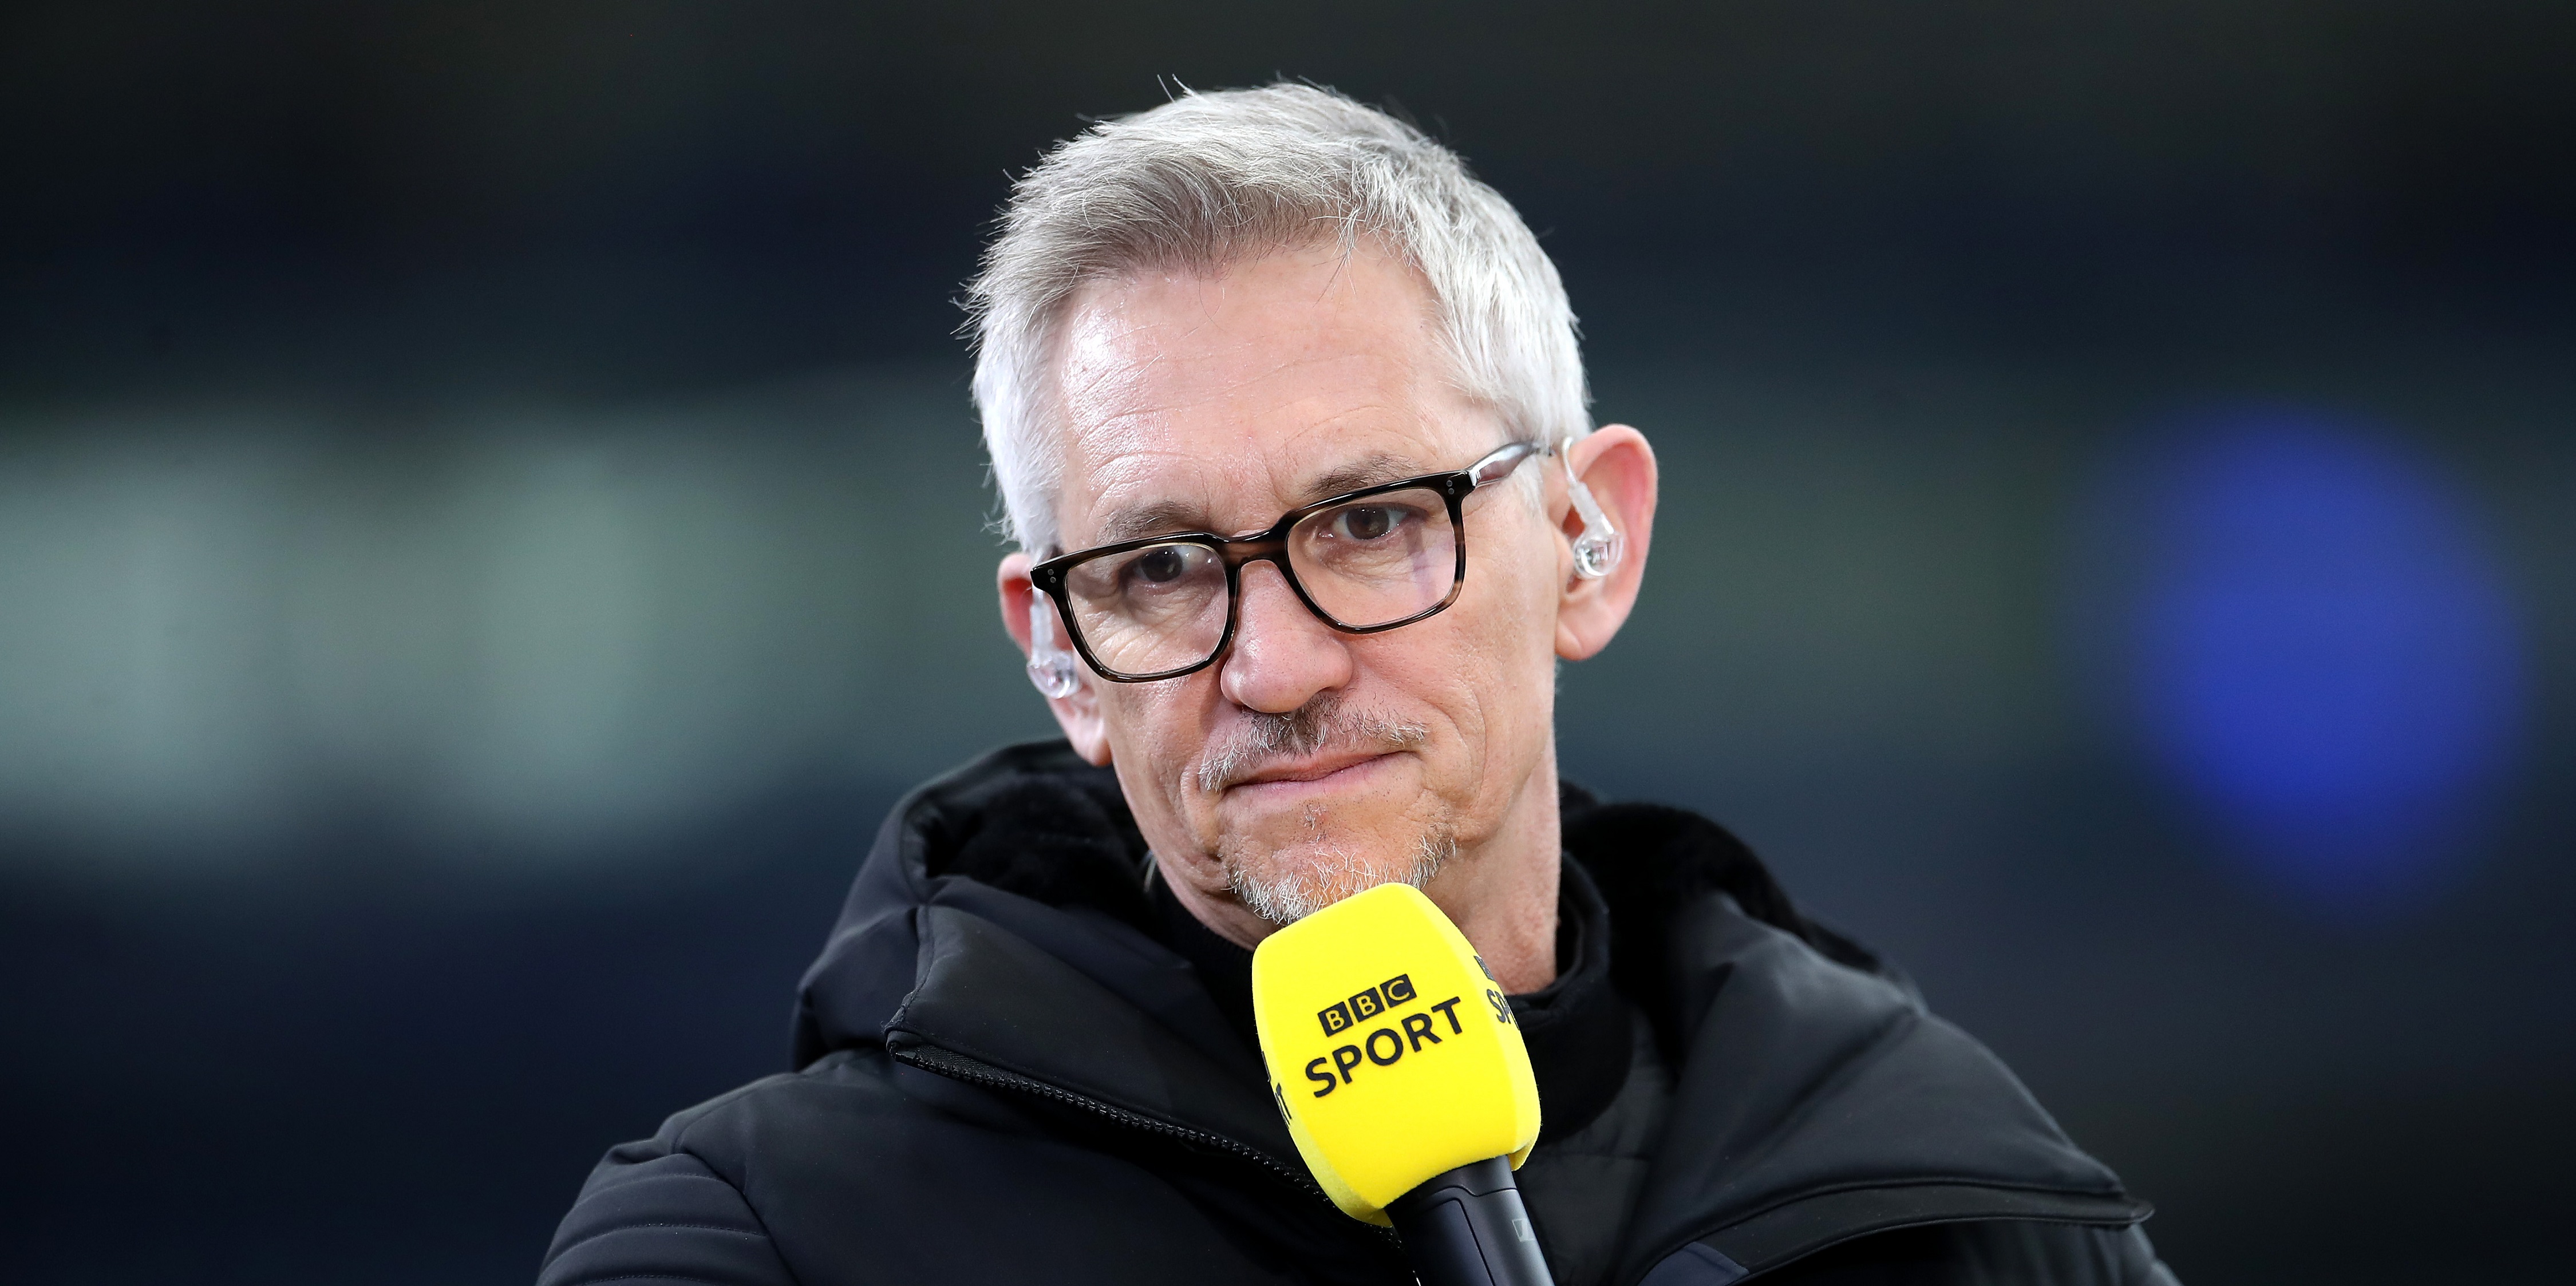 Gary Lineker surprisingly agrees with claim that ex-Liverpool man is ‘one of the most underrated strikers of our generation’